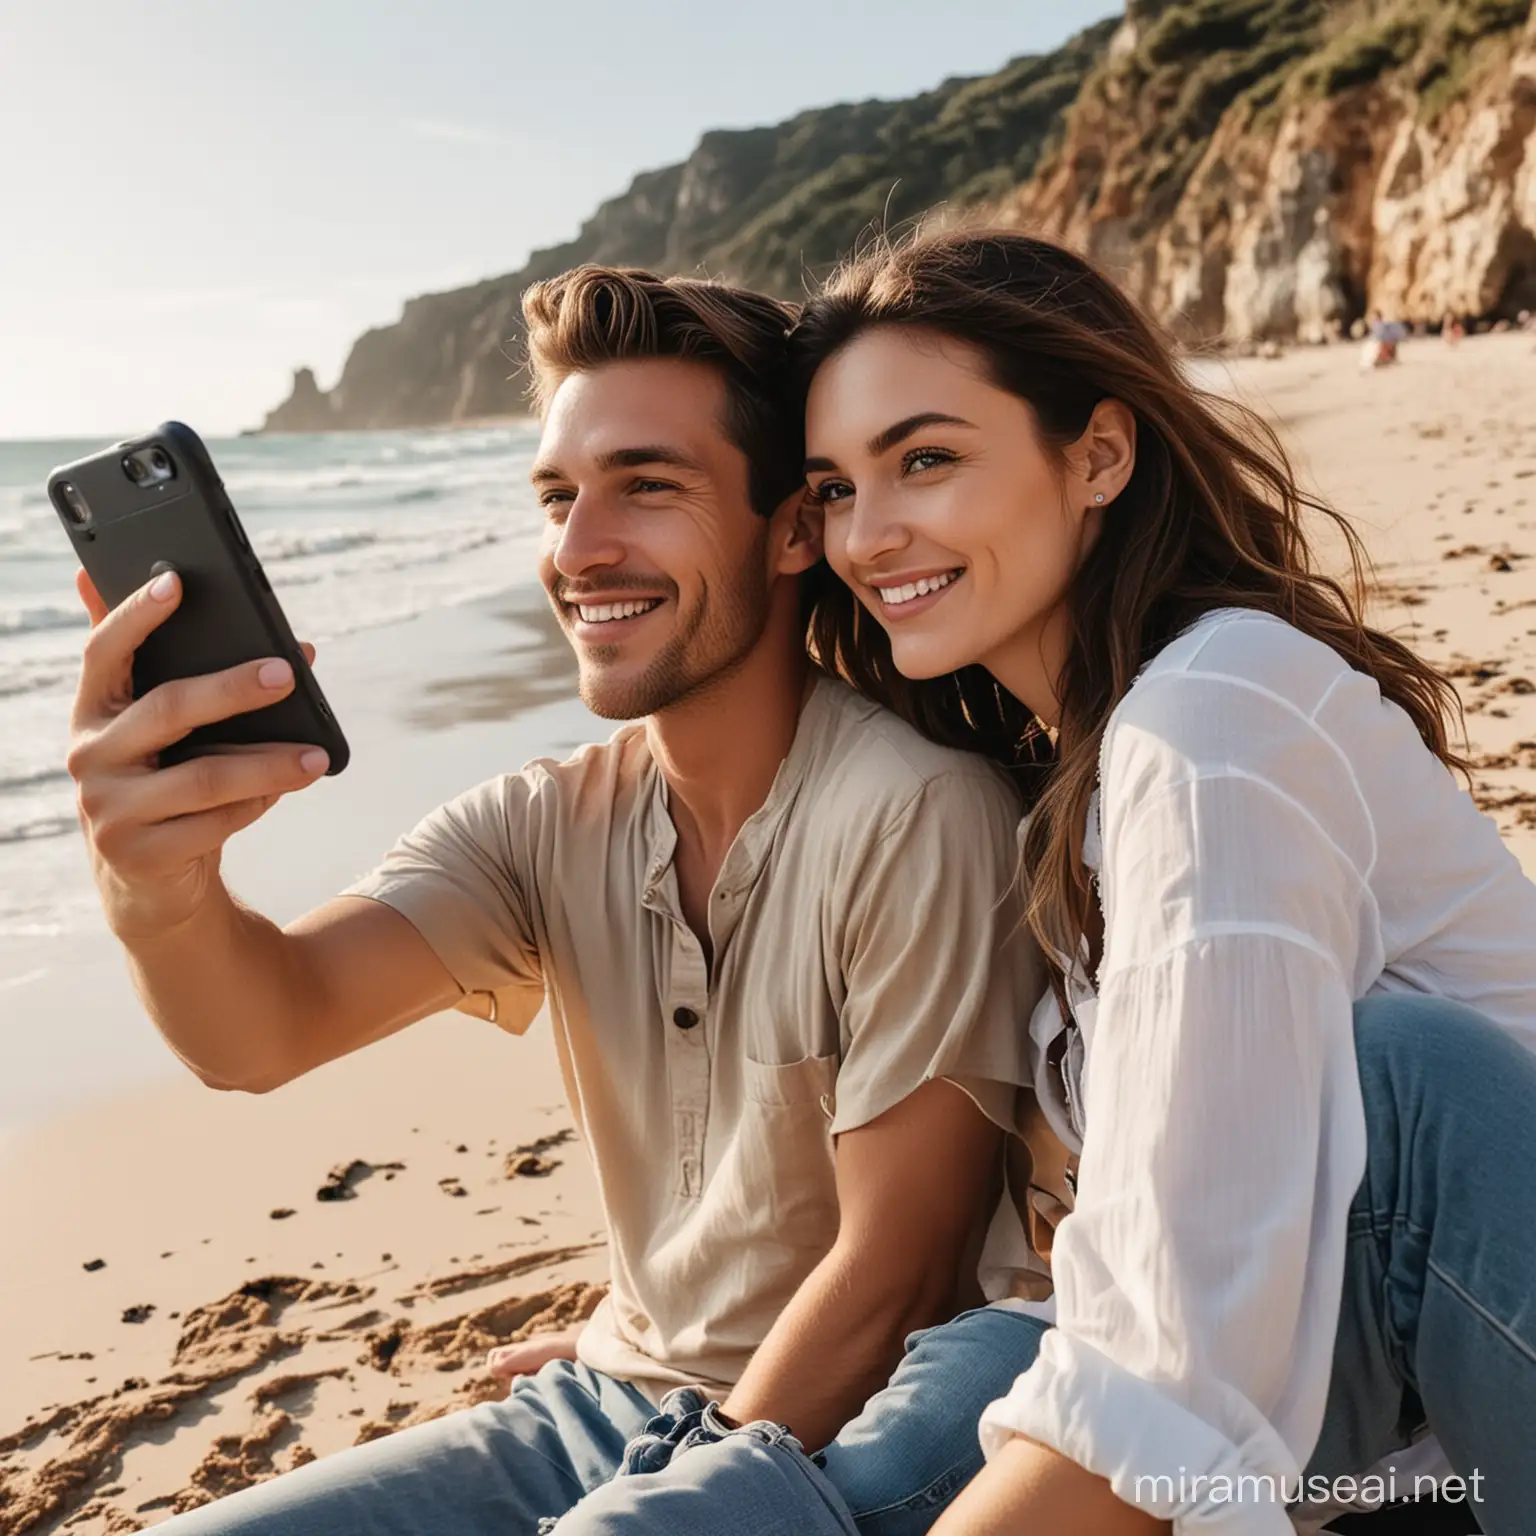 Profile angle of a couple sitting on the beach and taking a selfie with a small camera